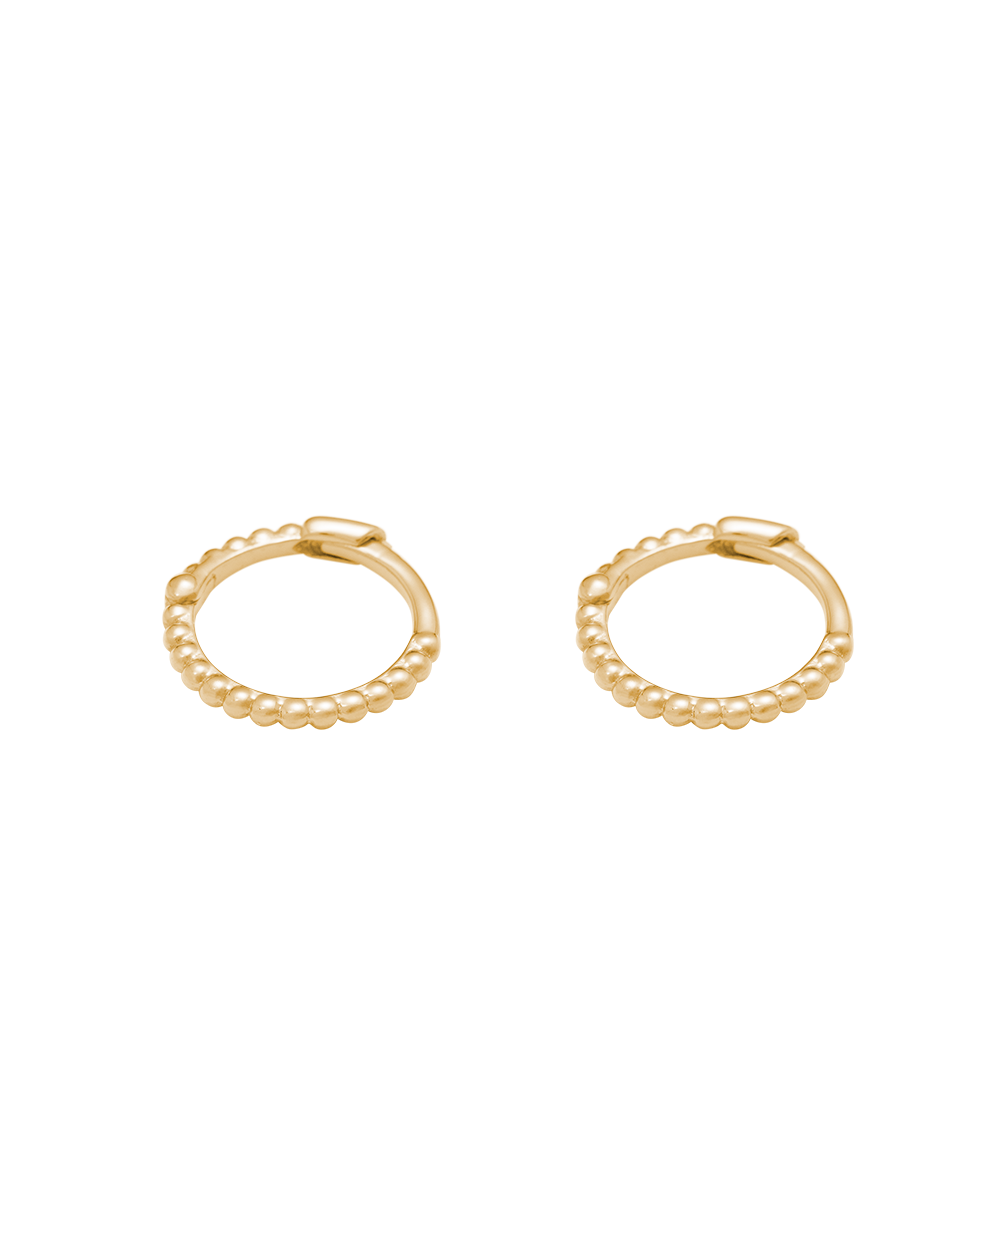 L'AMOUR HOOPS (18K GOLD PLATED)